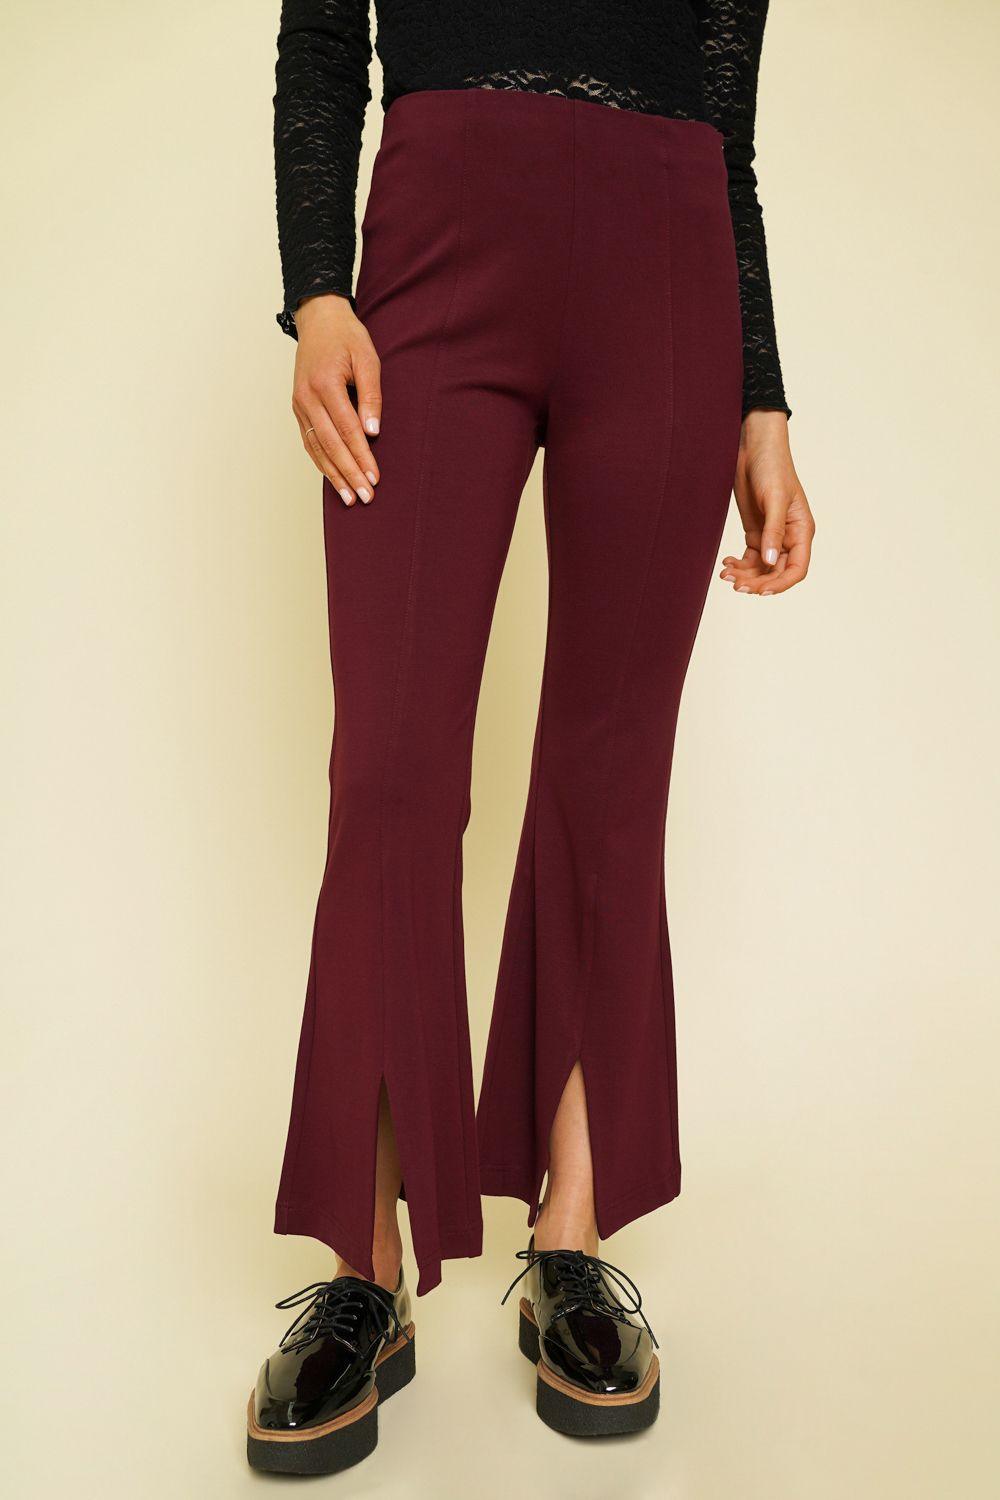 Free People Double Dutch Coated Mid Rise Front Slit Pull On Pants |  Dillard's